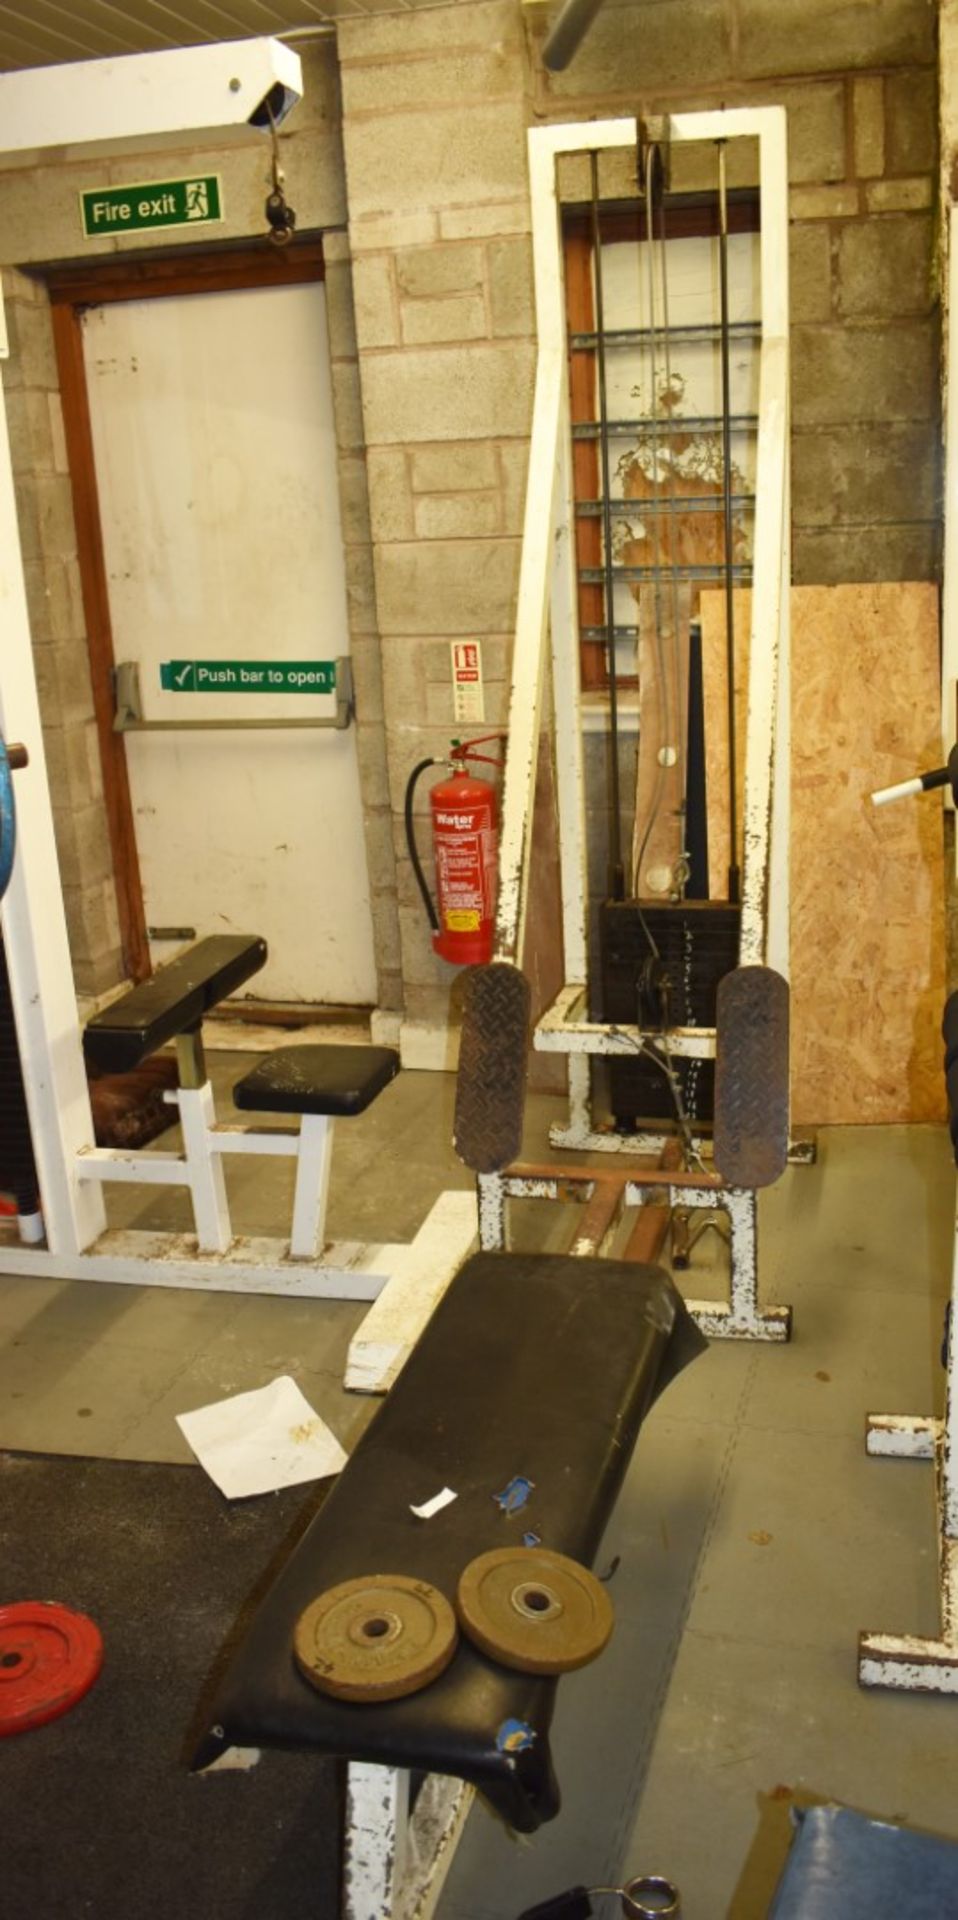 Contents of Bodybuilding and Strongman Gym - Includes Approx 30 Pieces of Gym Equipment, Floor Mats, - Image 48 of 95